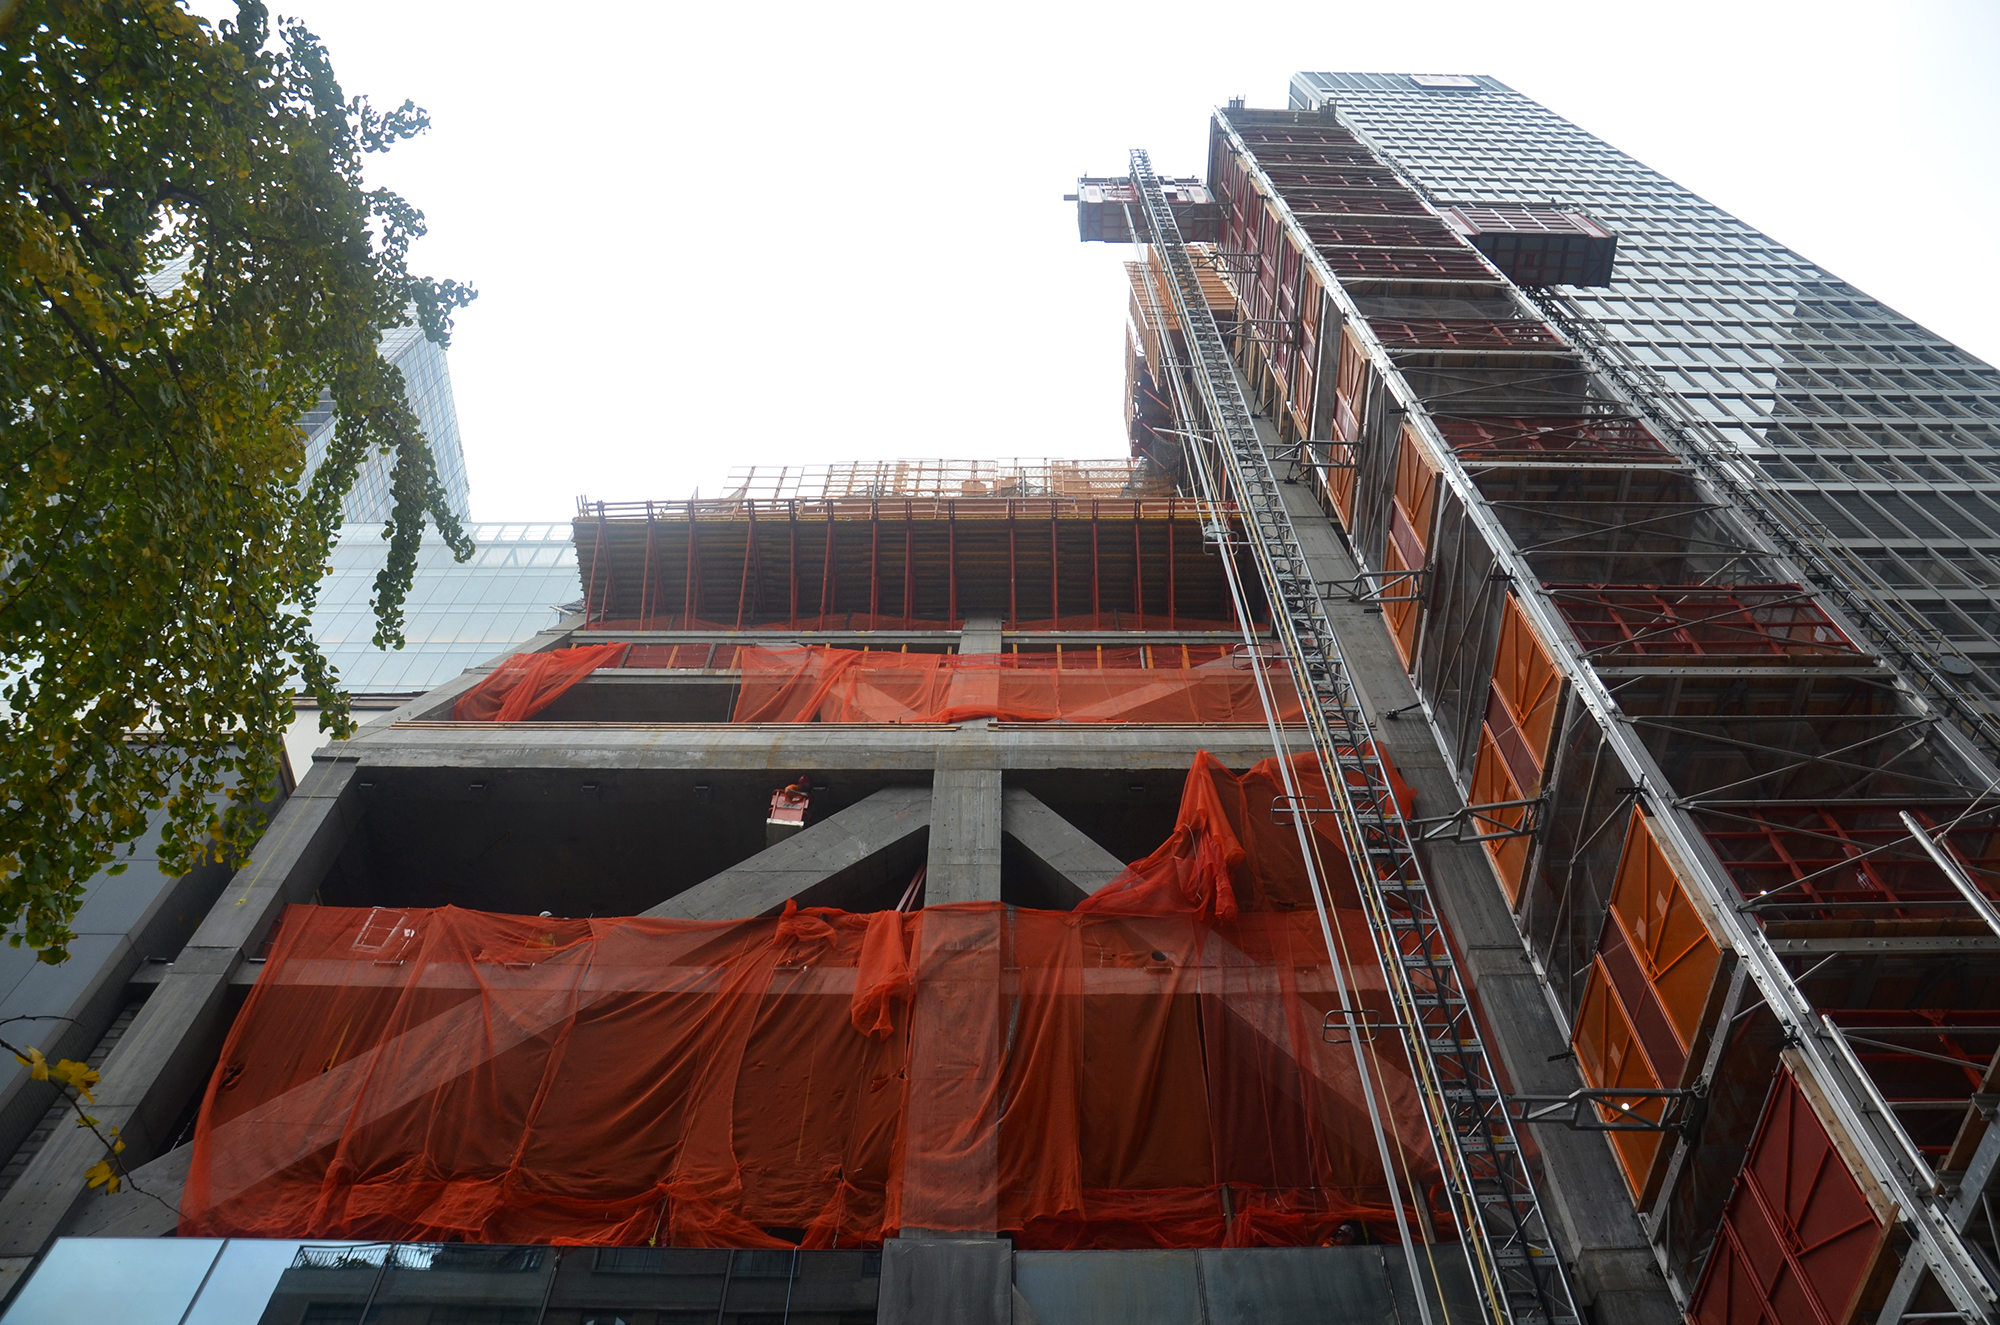 Construction on the West 54th Street side of 53W53